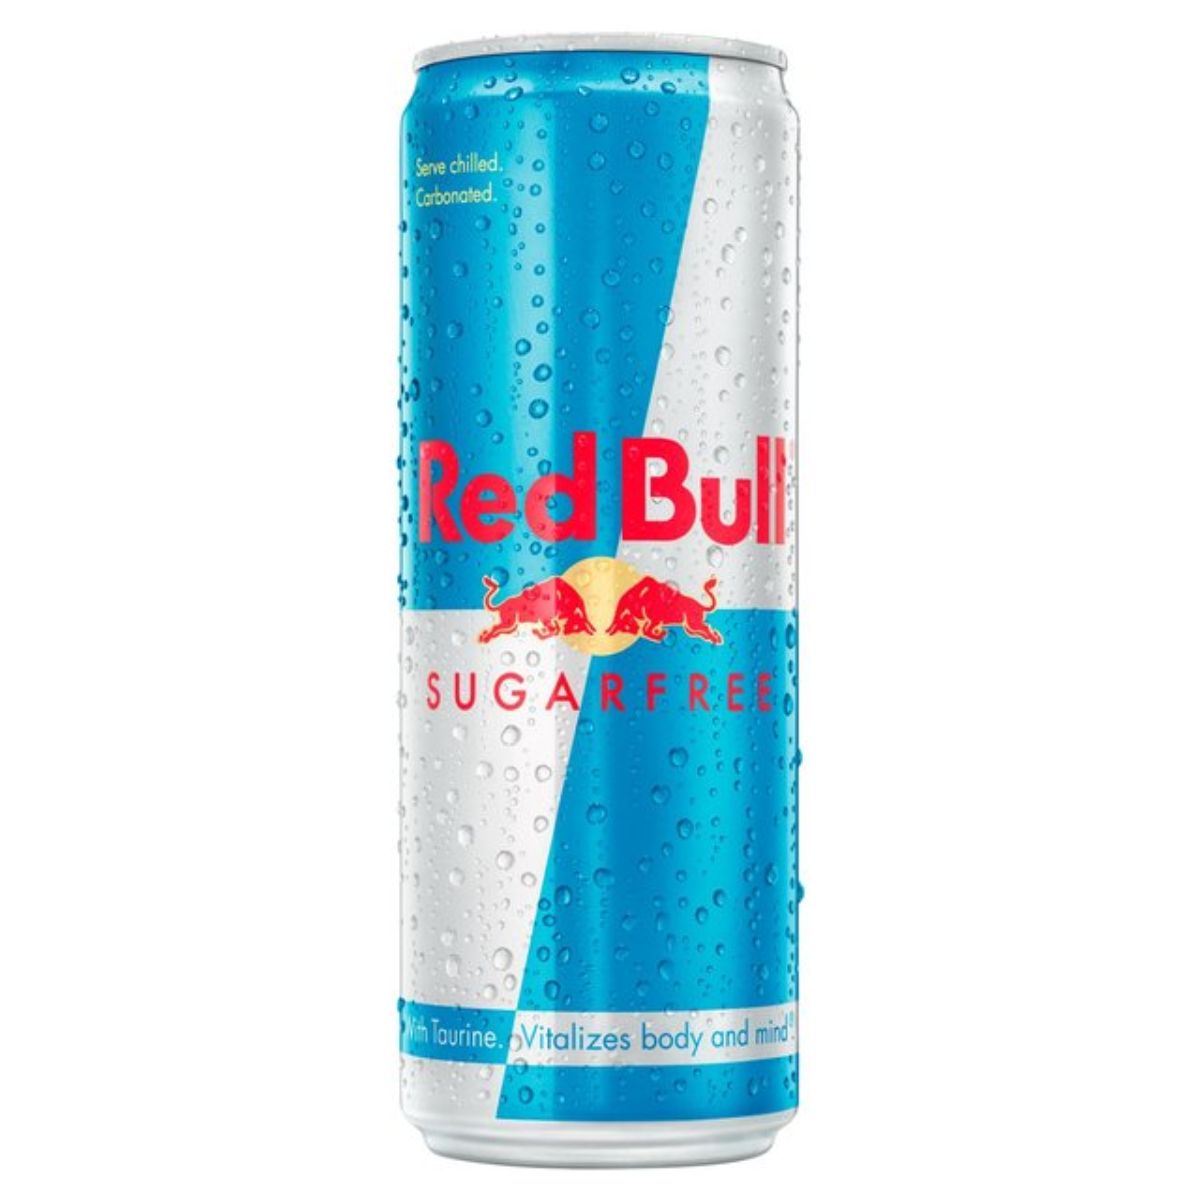 A can of Redbull - Sugar free - 355ml on a white background.